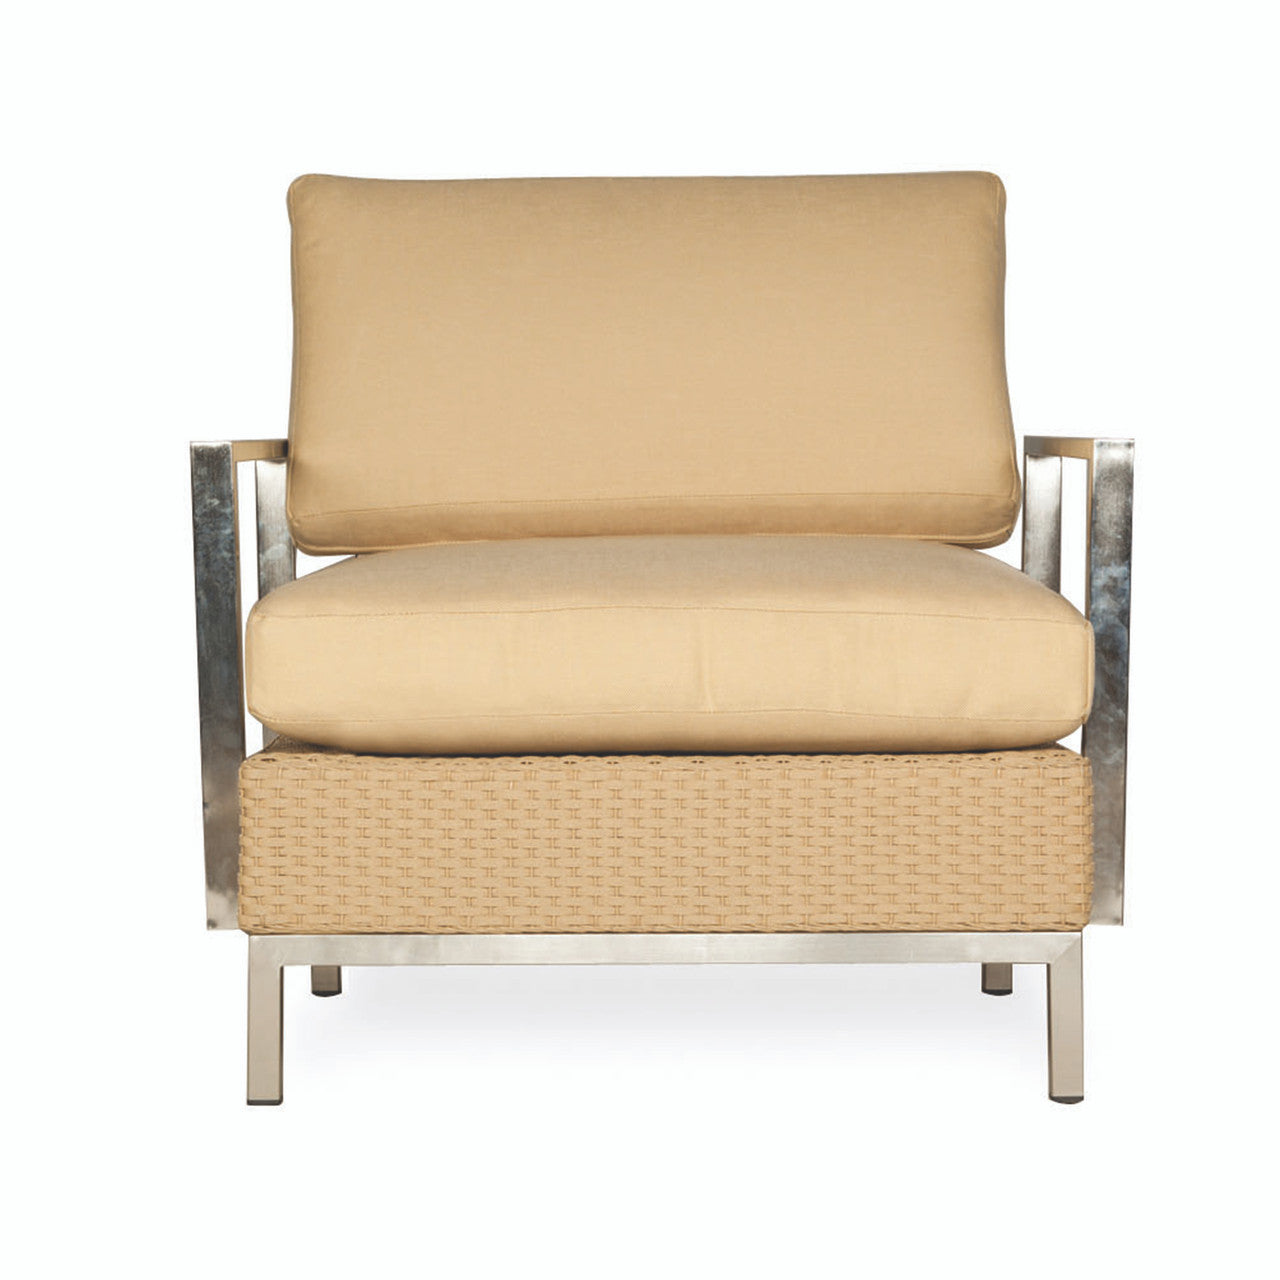 Lloyd Flanders Elements Wicker Lounge Chair With Stainless Steel Arms and Back